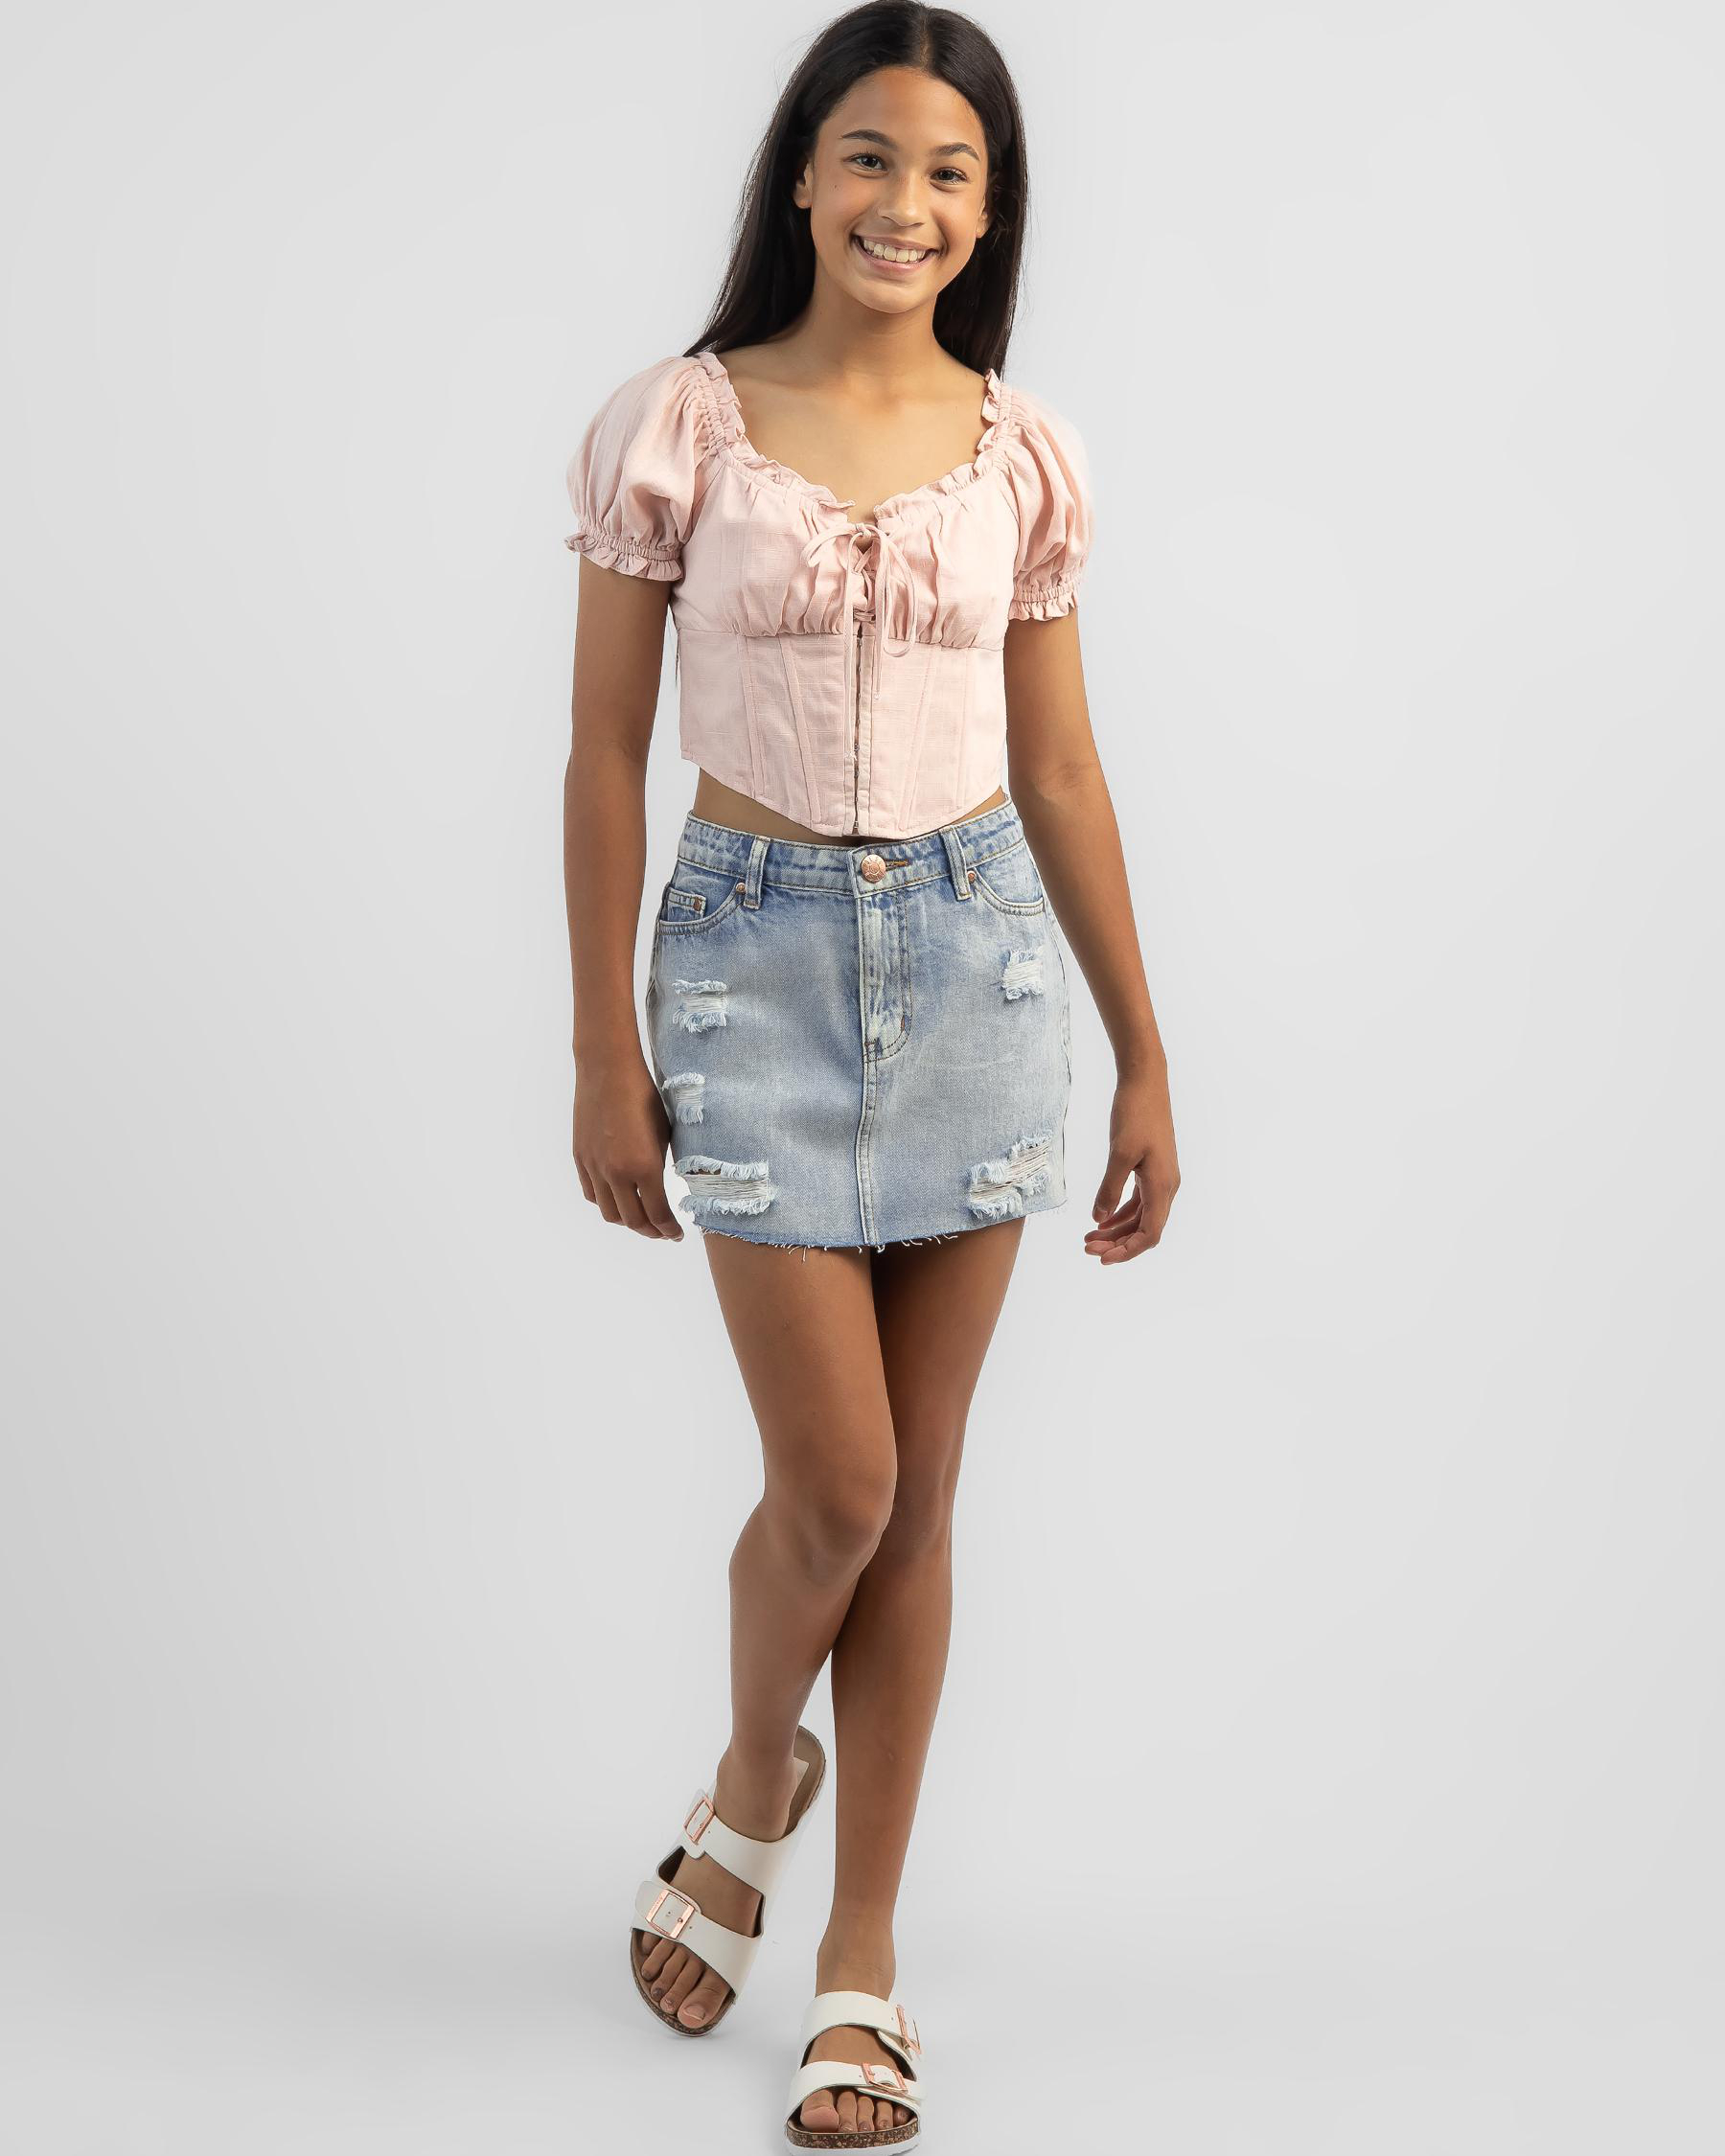 Ava And Ever Girls' Sabrina Corset Top In Light Pink - FREE* Shipping ...